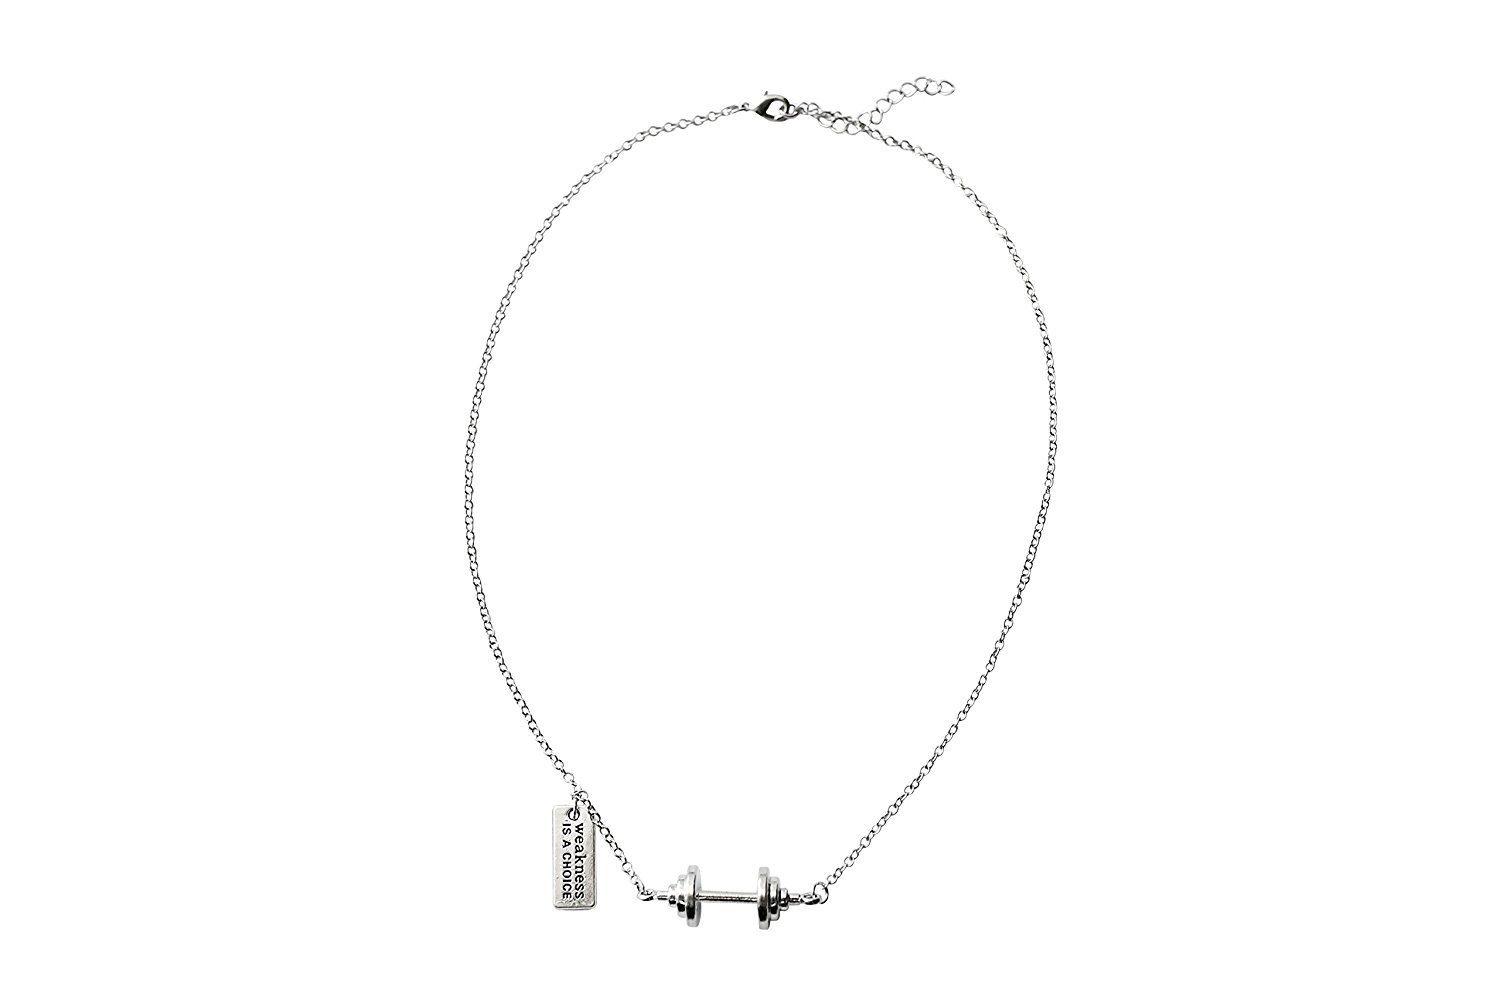 WODFitters Stainless Steel Necklace with Barbell and "Weakness Is a Choice" Charm - Comes with Gift Box 